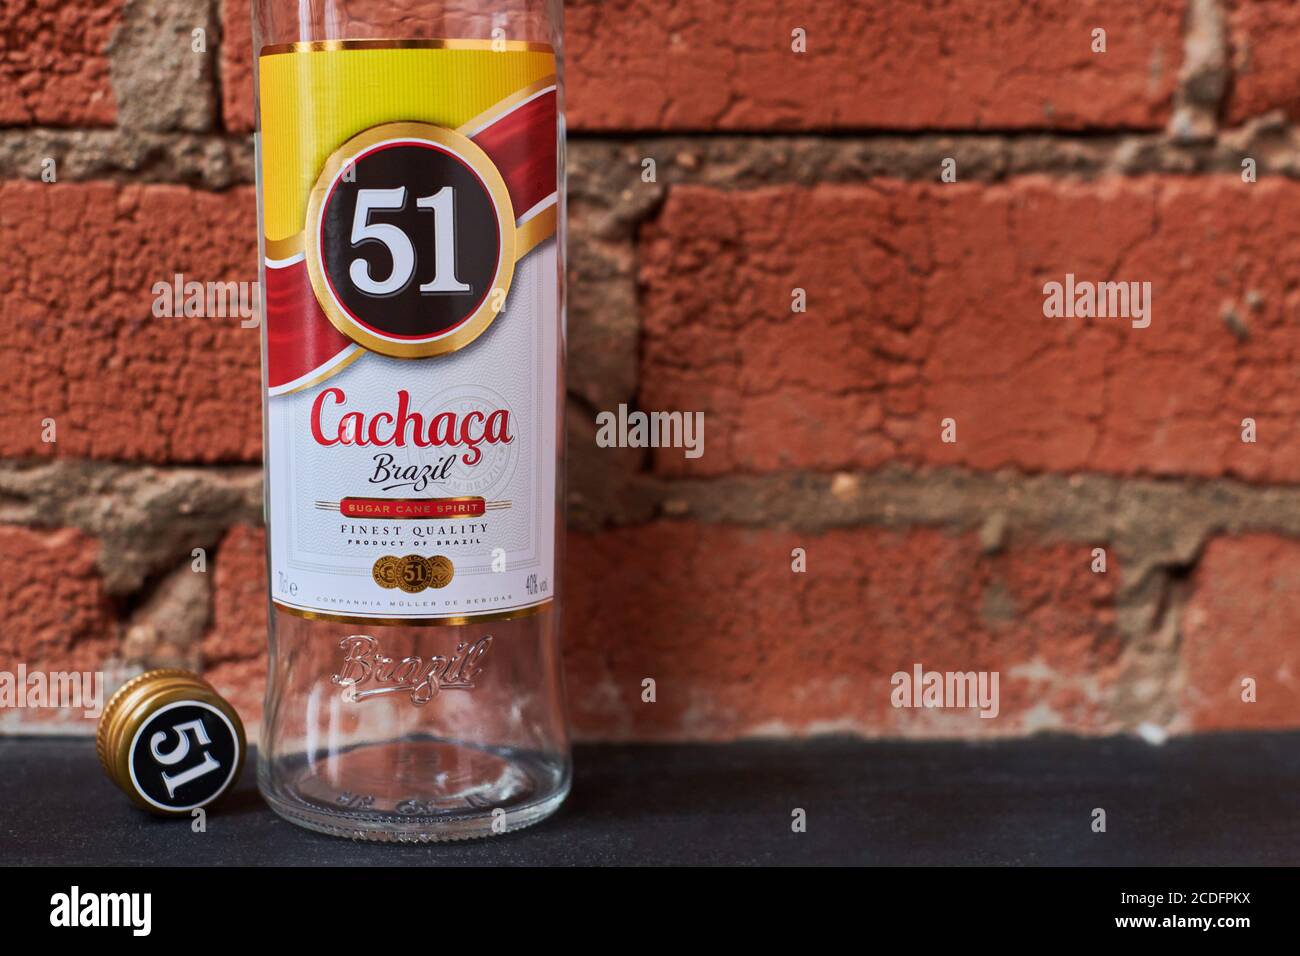 Moscow - 23.11.2019 - Cachaca 51 bottle. Brazilian rum. Exotic Brazil  strong alcohol drink rom fermented sugarcane juice. Loft apartment  background Stock Photo - Alamy